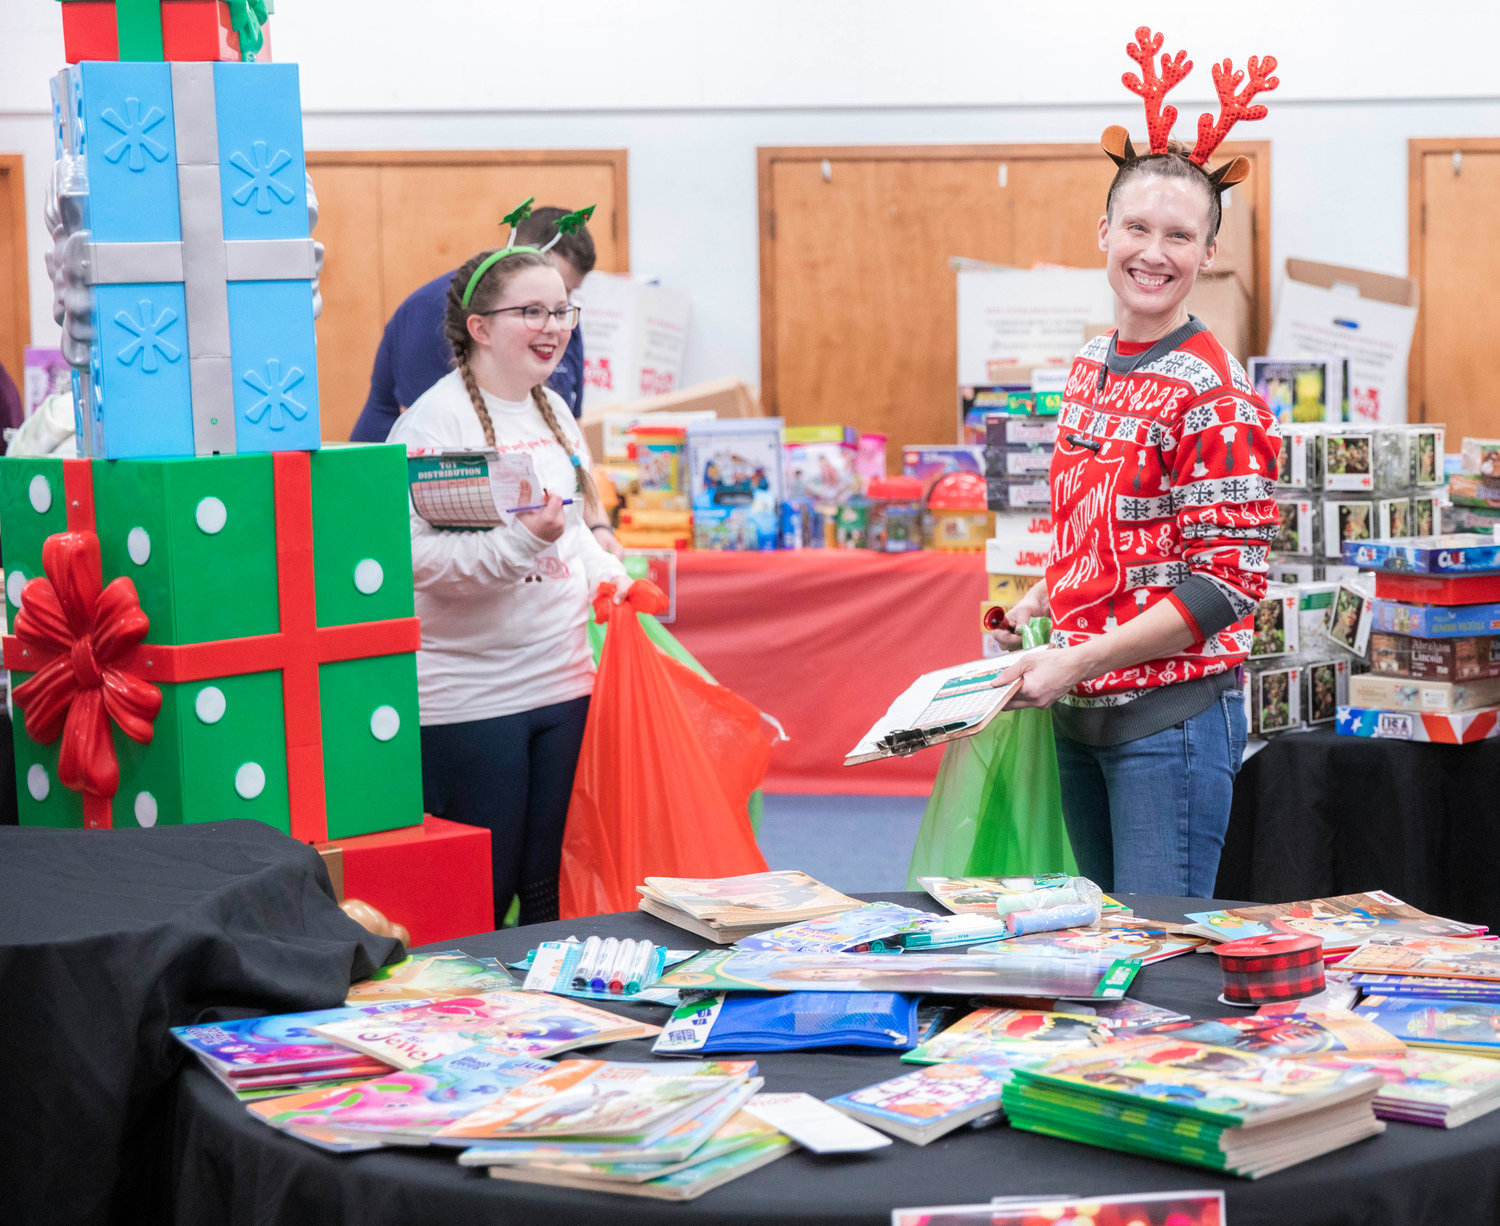 Volunteers smile while helping visitors at The Salvation Army Christmas toy giveaway Tuesday evening in Centralia.